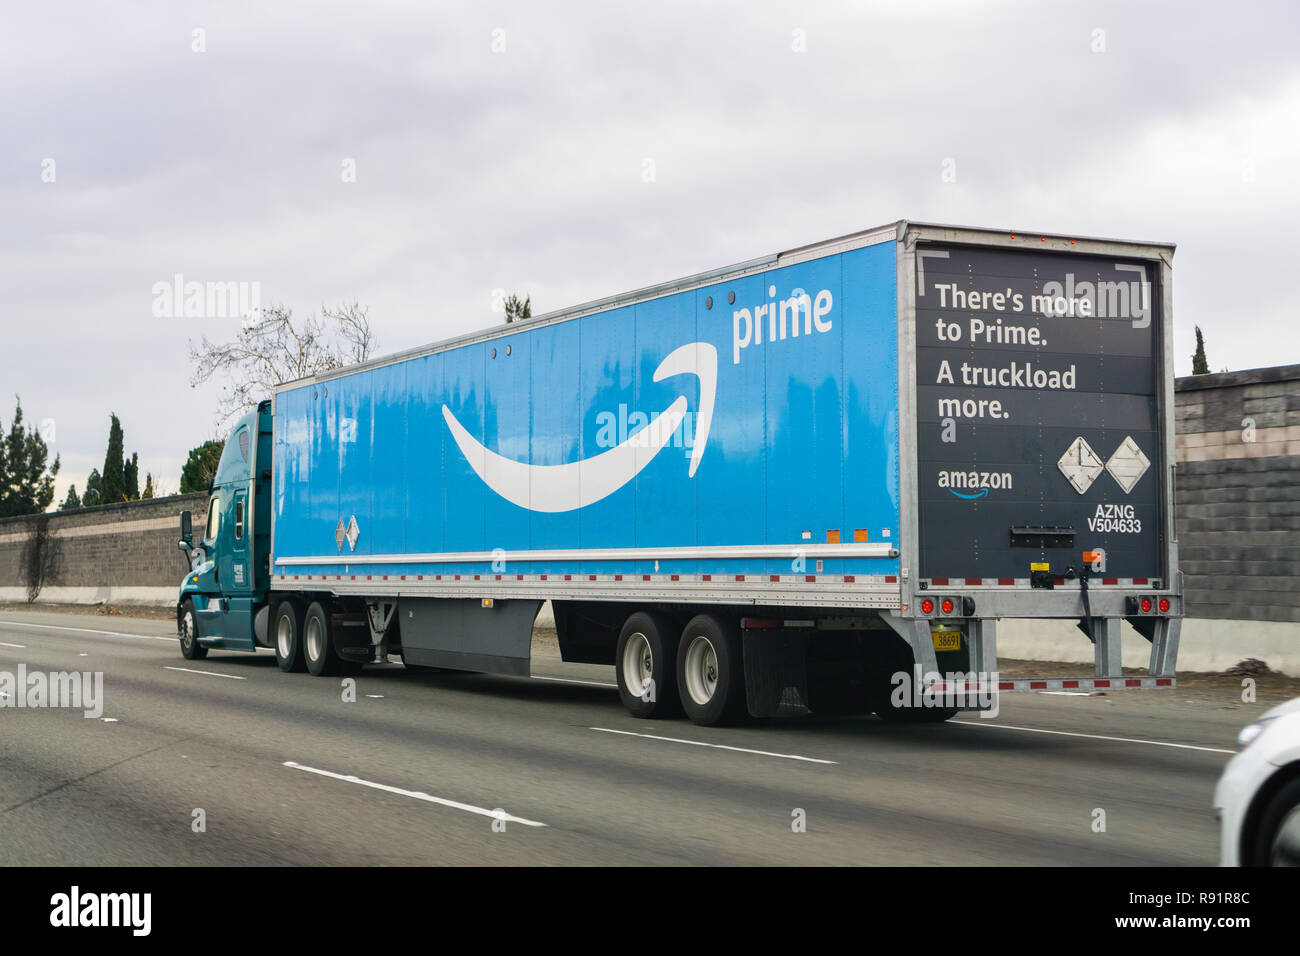 December 15, 2018 Fremont / CA / USA - Amazon truck driving on the freeway, the large Prime logo printed on the side; San Francisco bay area Stock Photo